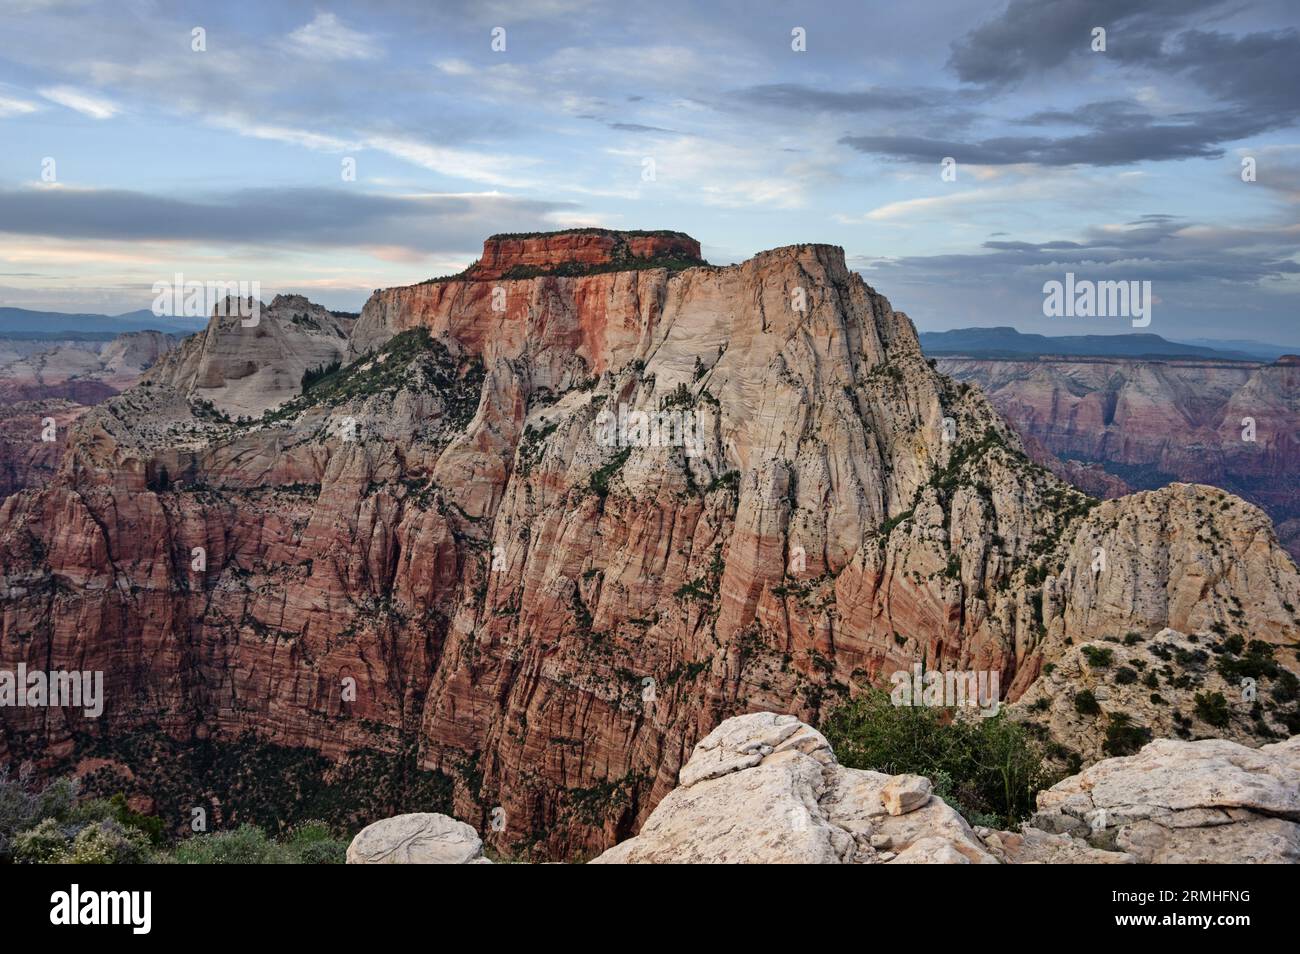 West Temple from Mount Kinesava near sunset in Zion National Park Stock Photo